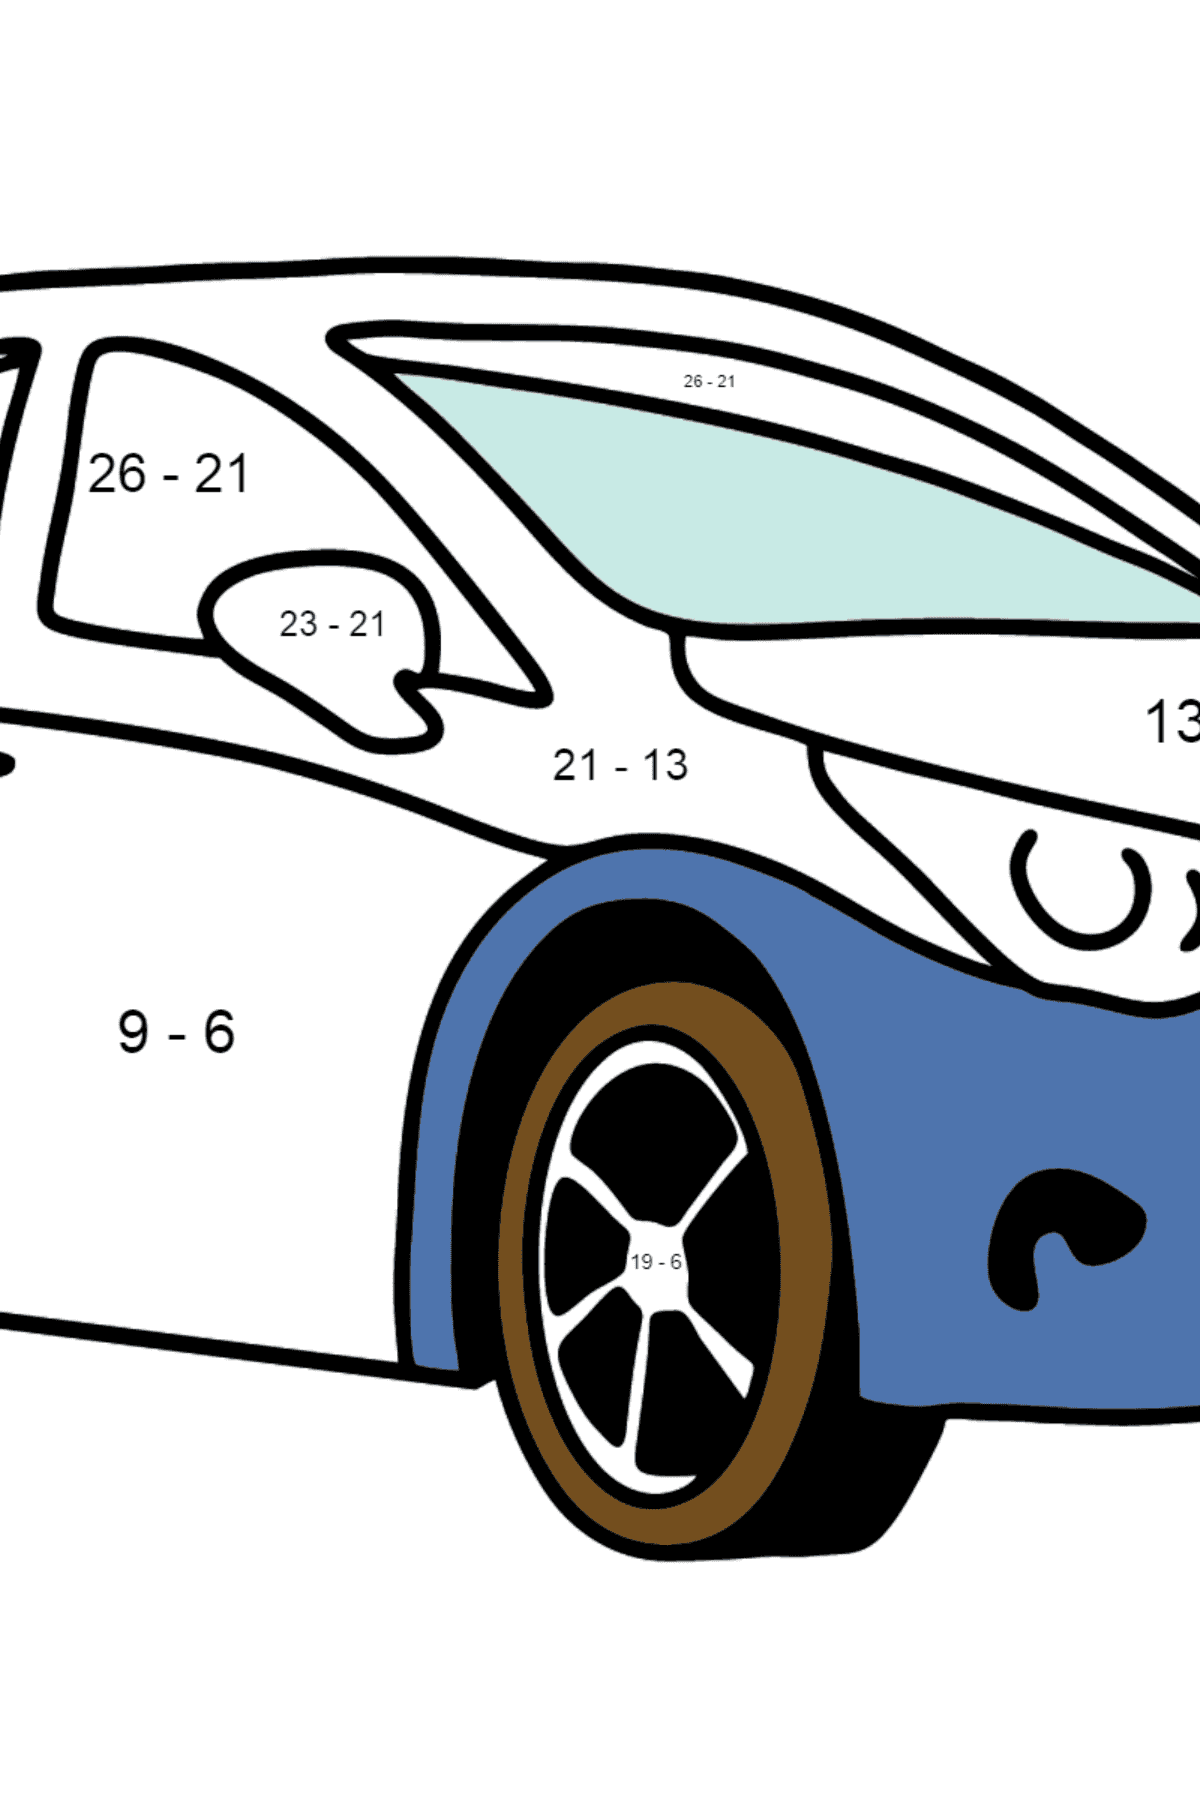 Toyota Avensis Car coloring page - Math Coloring - Subtraction for Kids